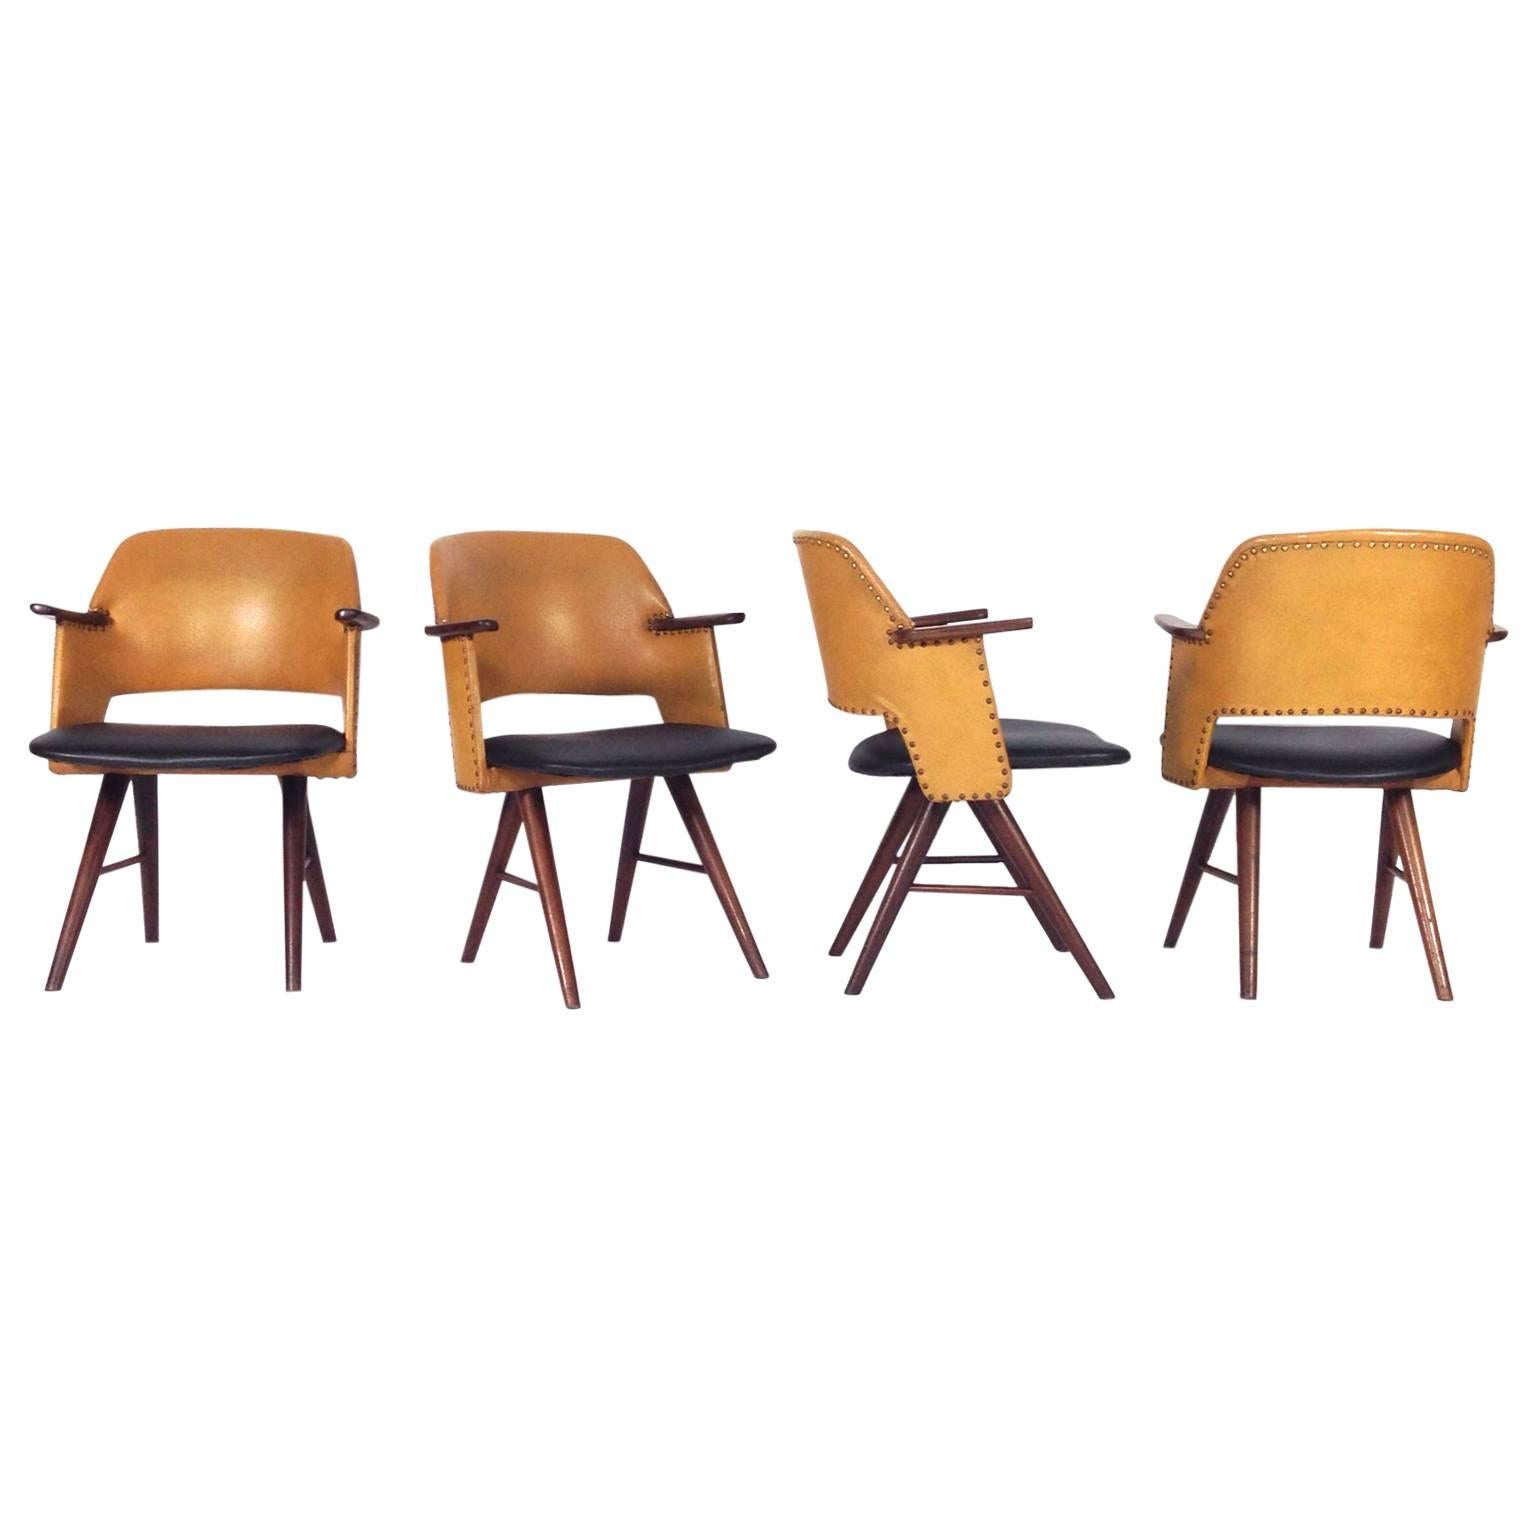 FE30 Chairs by Cees Braakman for PASTOE